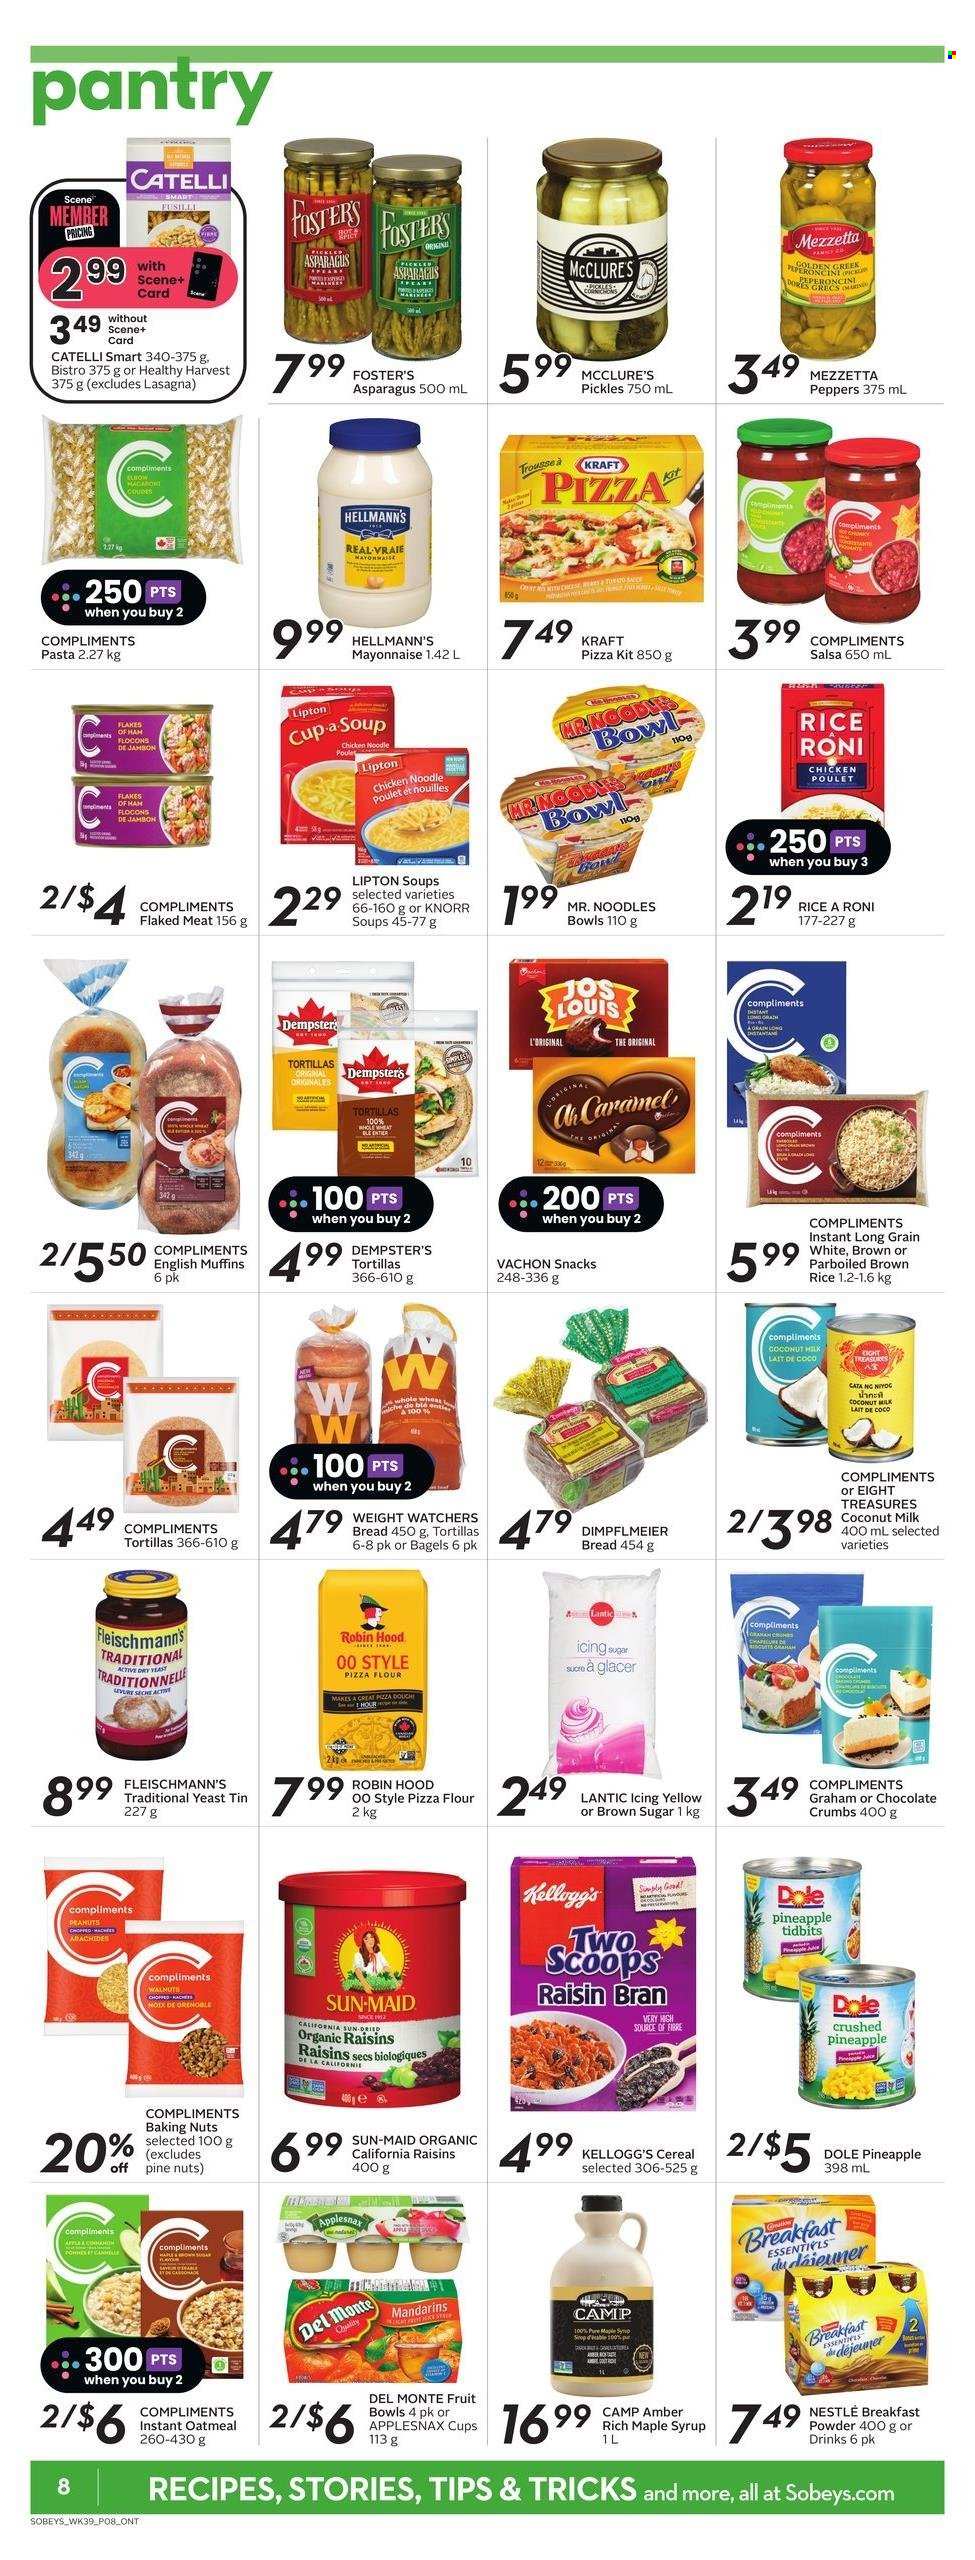 thumbnail - Sobeys Flyer - January 26, 2023 - February 01, 2023 - Sales products - bagels, bread, english muffins, tortillas, asparagus, Dole, peppers, mandarines, pineapple, pizza, soup, pasta, noodles, Kraft®, yeast, mayonnaise, Hellmann’s, chocolate, snack, Kellogg's, oatmeal, icing sugar, coconut milk, pickles, Del Monte, cereals, Raisin Bran, brown rice, rice, caramel, salsa, maple syrup, syrup, walnuts, peanuts, Rin, bowl, Nestlé, Lipton, Knorr. Page 11.